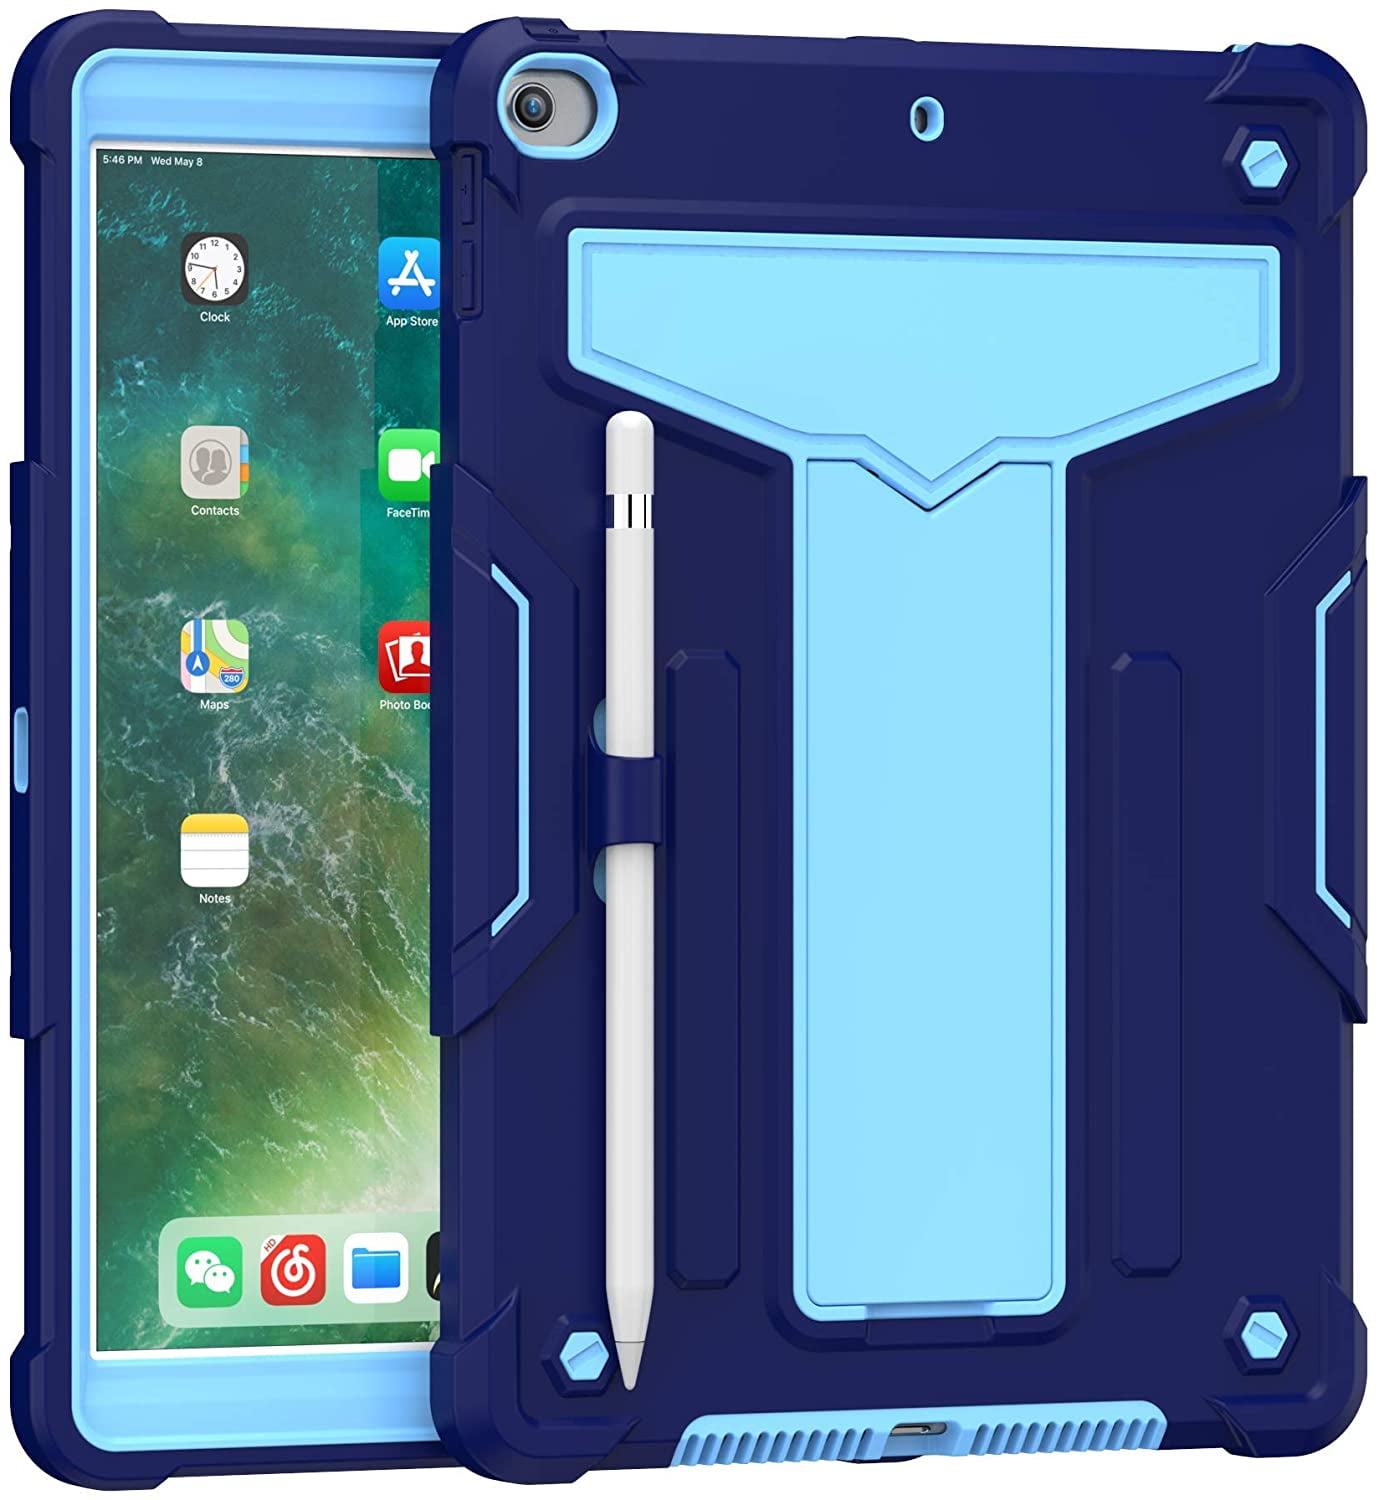 EpicGadget Case for iPad 10.2 (9th/8th/7th Gen) Protective Rugged Hybrid Case with Kickstand Pencil Holder Cover for Apple 10.2 Inch iPad 9th/8th/7th Generation 2021/2020/2019 Release (Navy Blue/Blue)